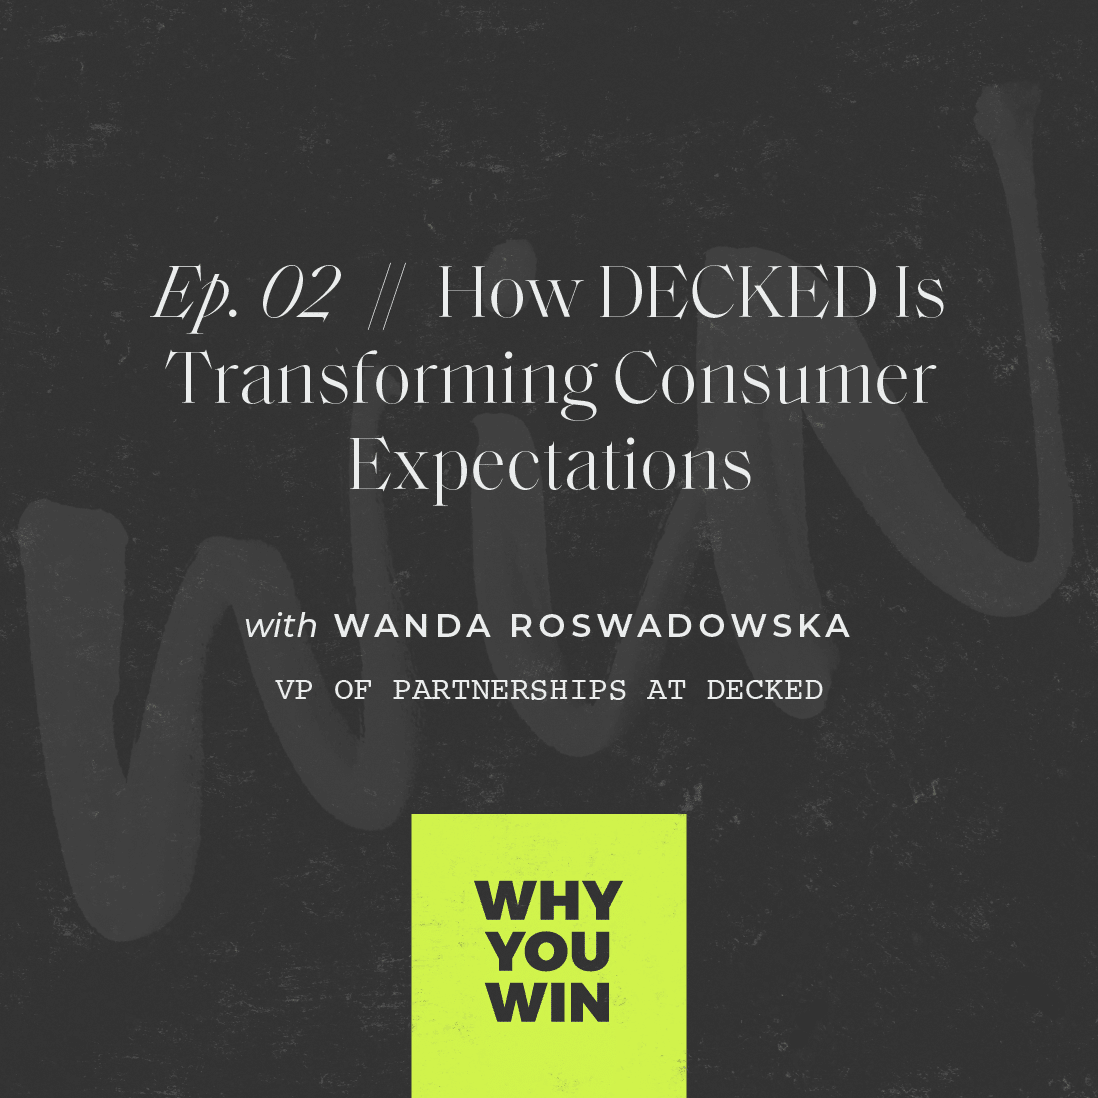 How DECKED is Transforming Consumer Expectations with Wanda Rozwadowska